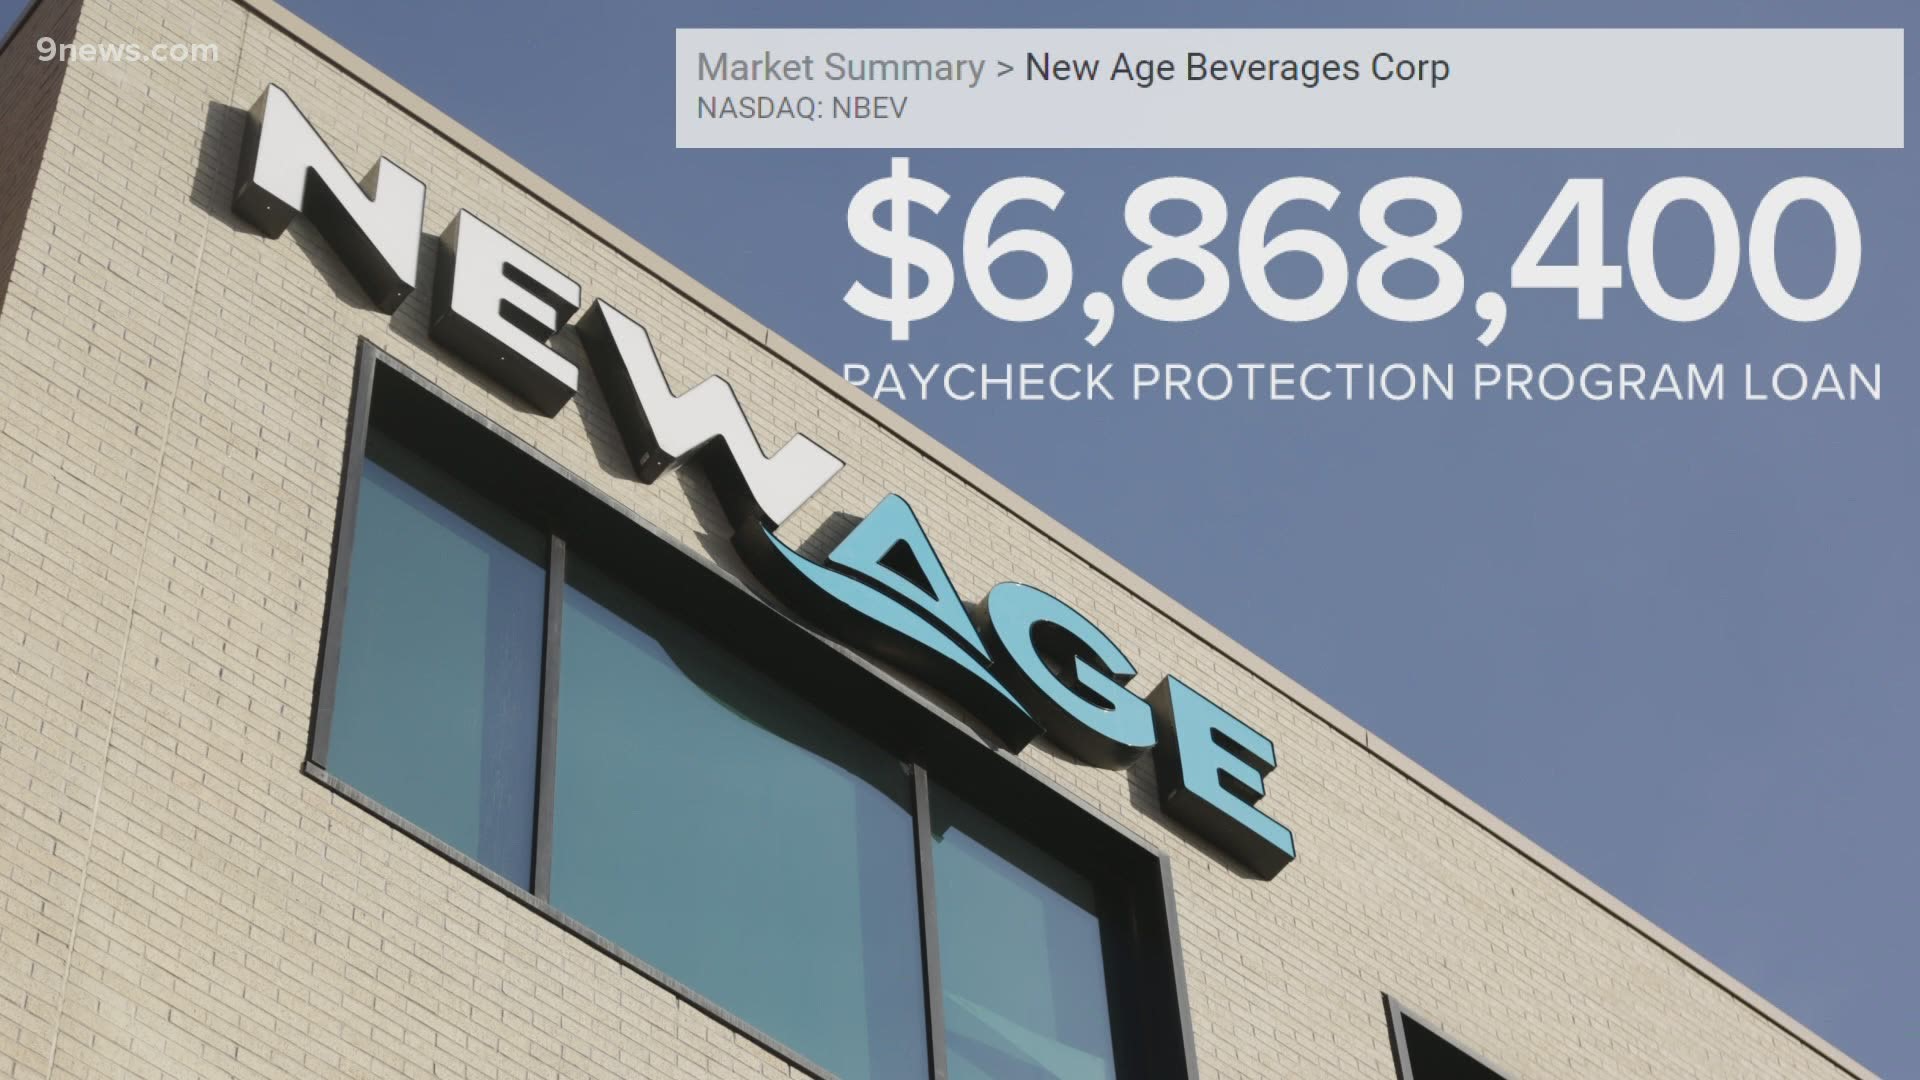 Denver-based New Age Beverage received a $6.8 million small-business loan from the government while many other small businesses are still trying to get help